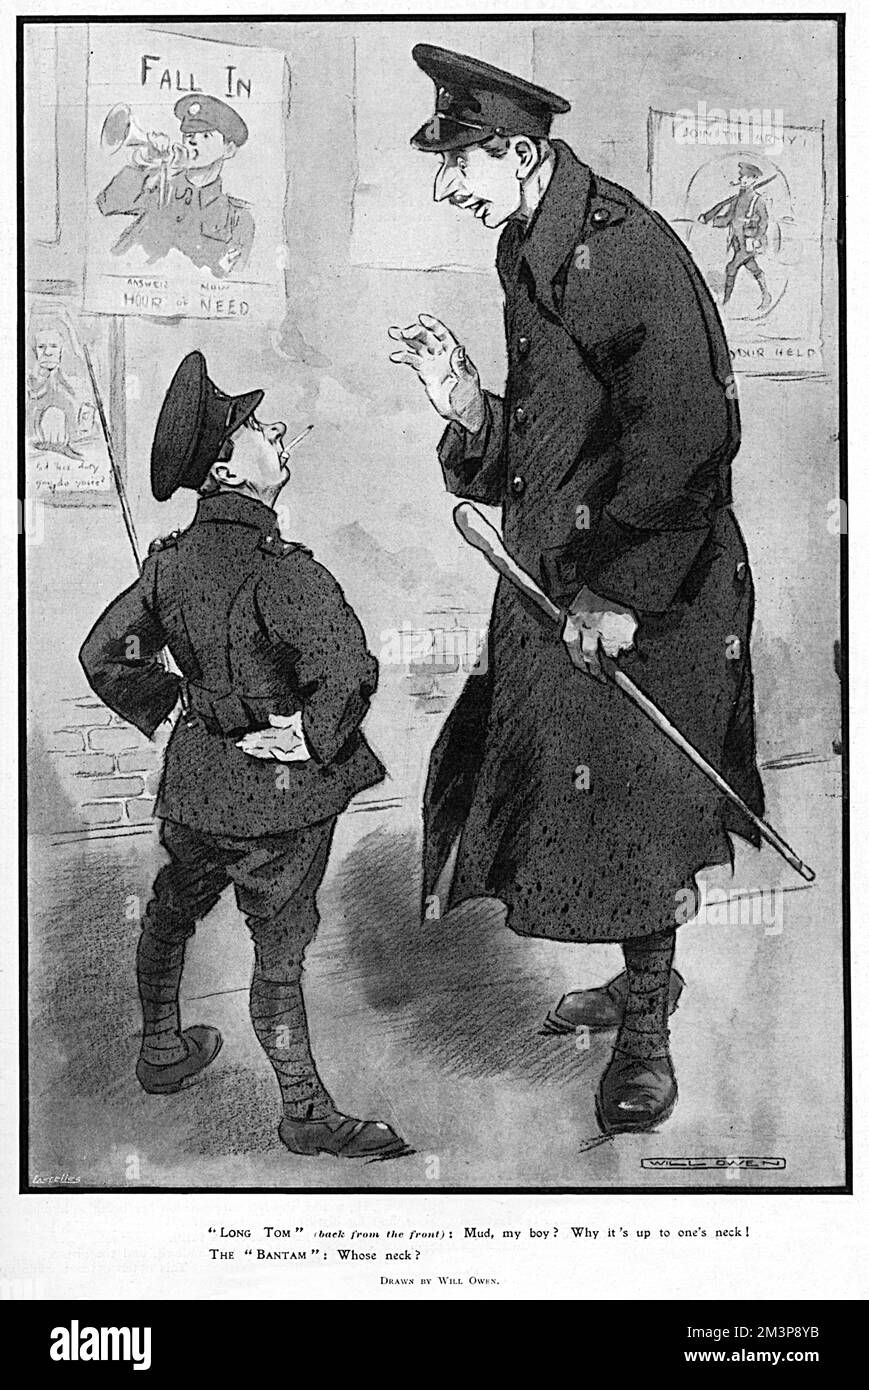 &quot;Long Tom&quot; (back from the front): Mud, my boy?  Why it's up to one's neck!  The &quot;Bantam&quot;: Whose neck?  Humorous cartoon by Will Owen showing a tall officer talking to a vertically challenged member of the Bantam Corps, battalions formed of shorter men.  The bantam expresses concern at the depth of the mud in the trenches.        Date: 1915 Stock Photo